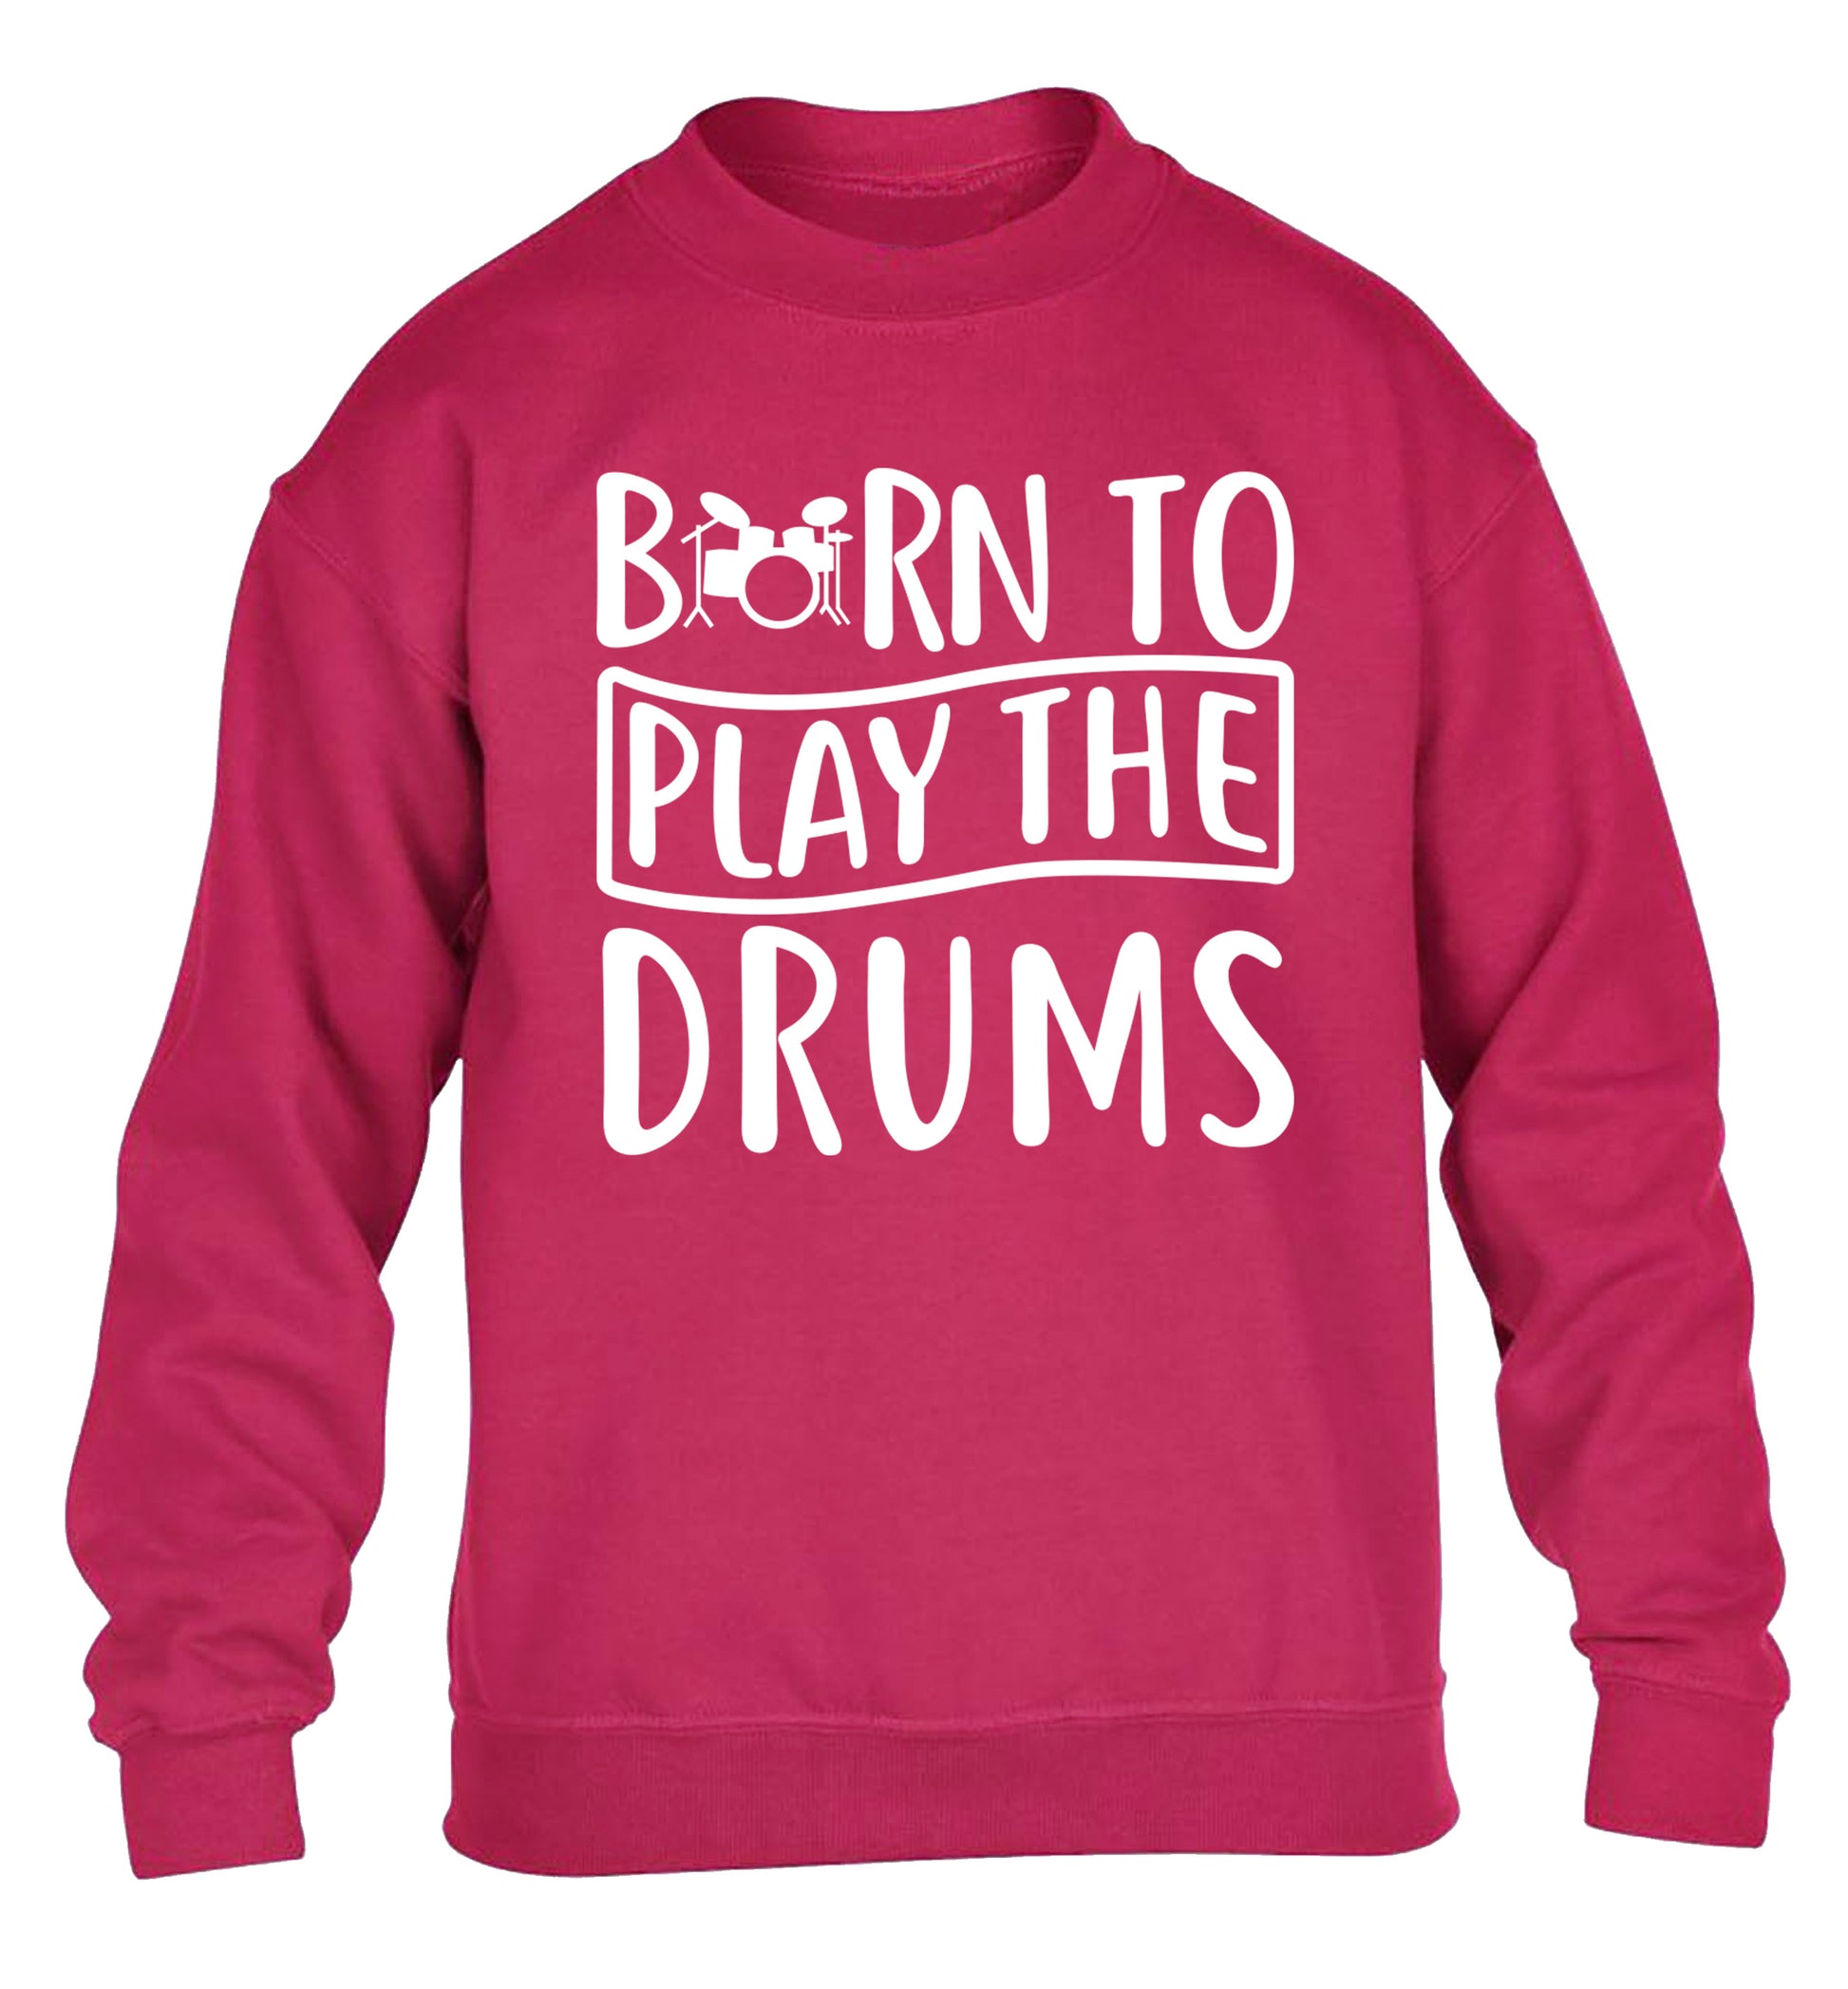 Born to play the drums children's pink sweater 12-14 Years